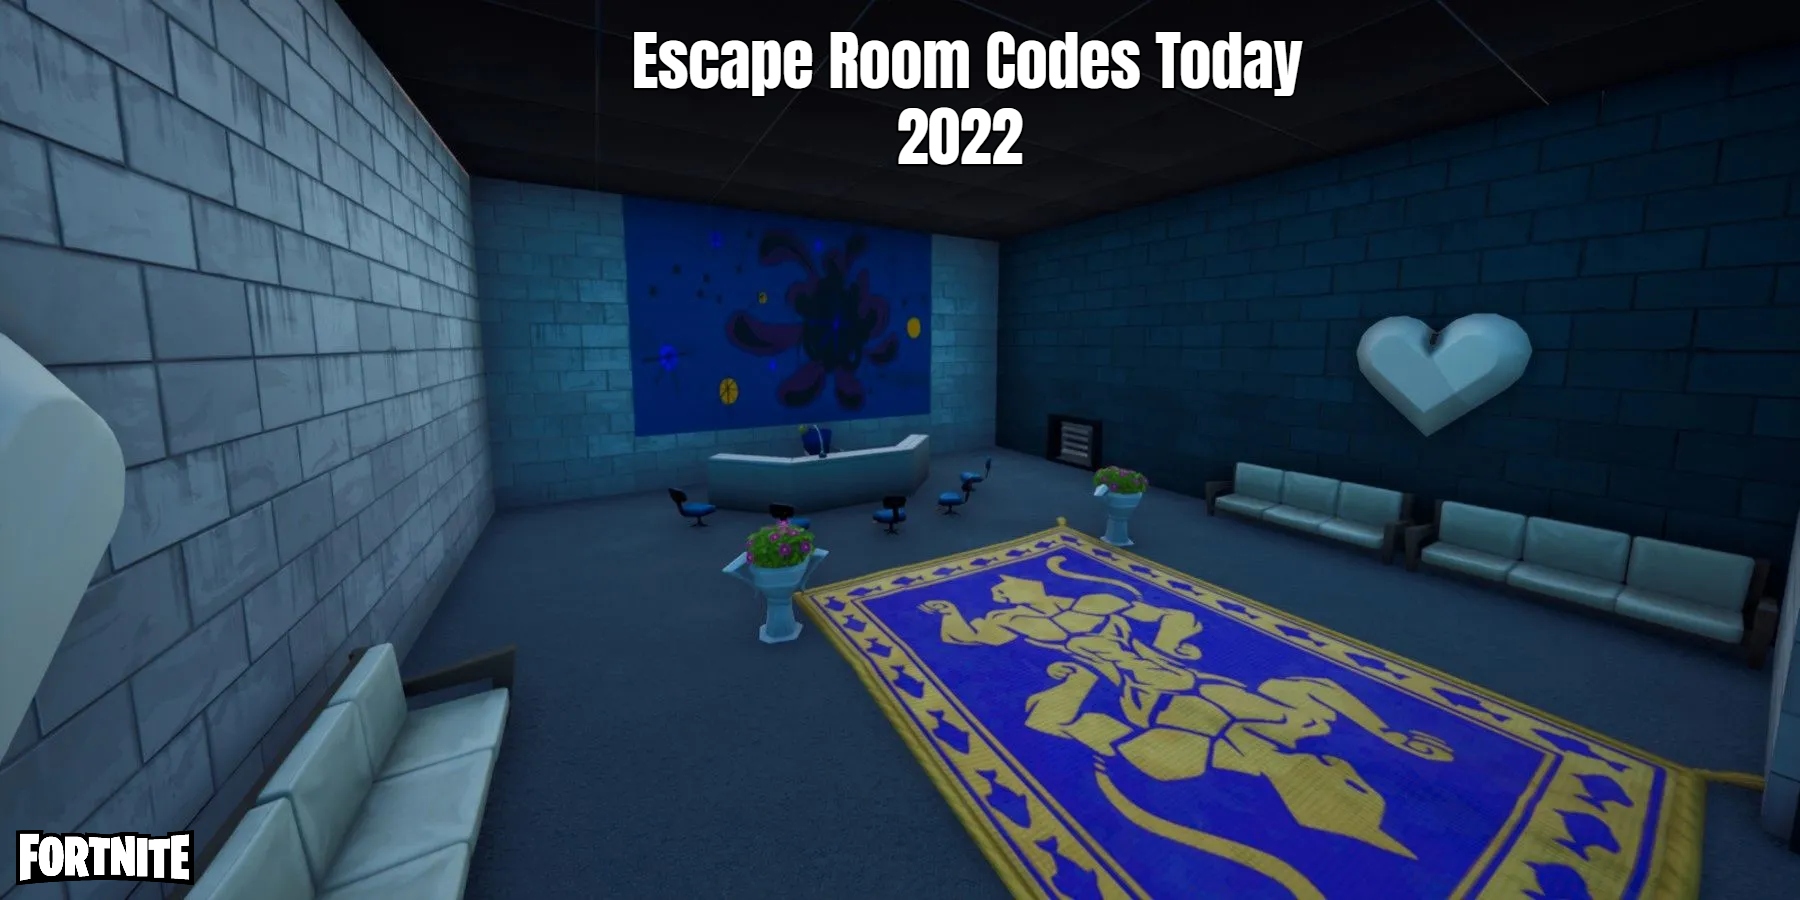 You are currently viewing Fortnite Escape Room Codes Today 2022 